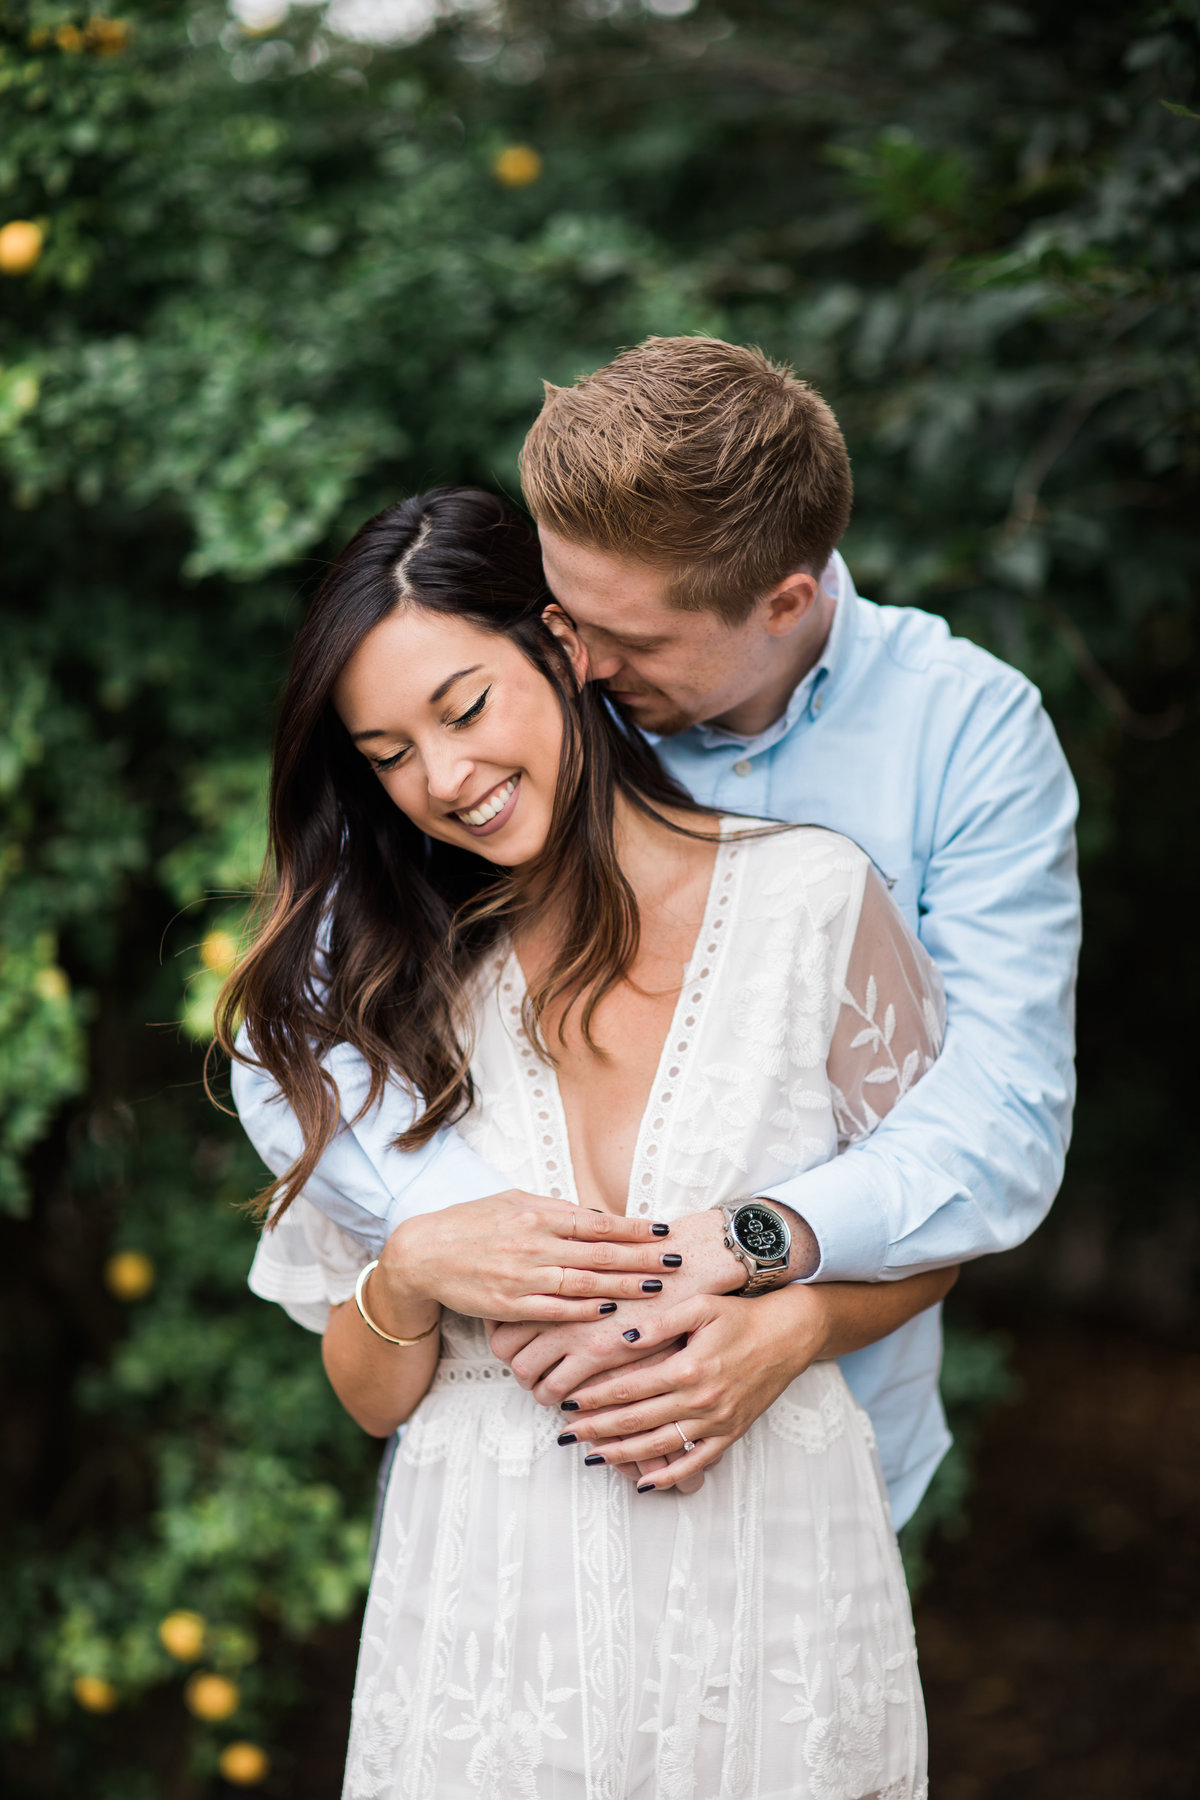 Young couple laughing and embracing during engagement session in Raleigh, North Carolina by Danielle Defayette